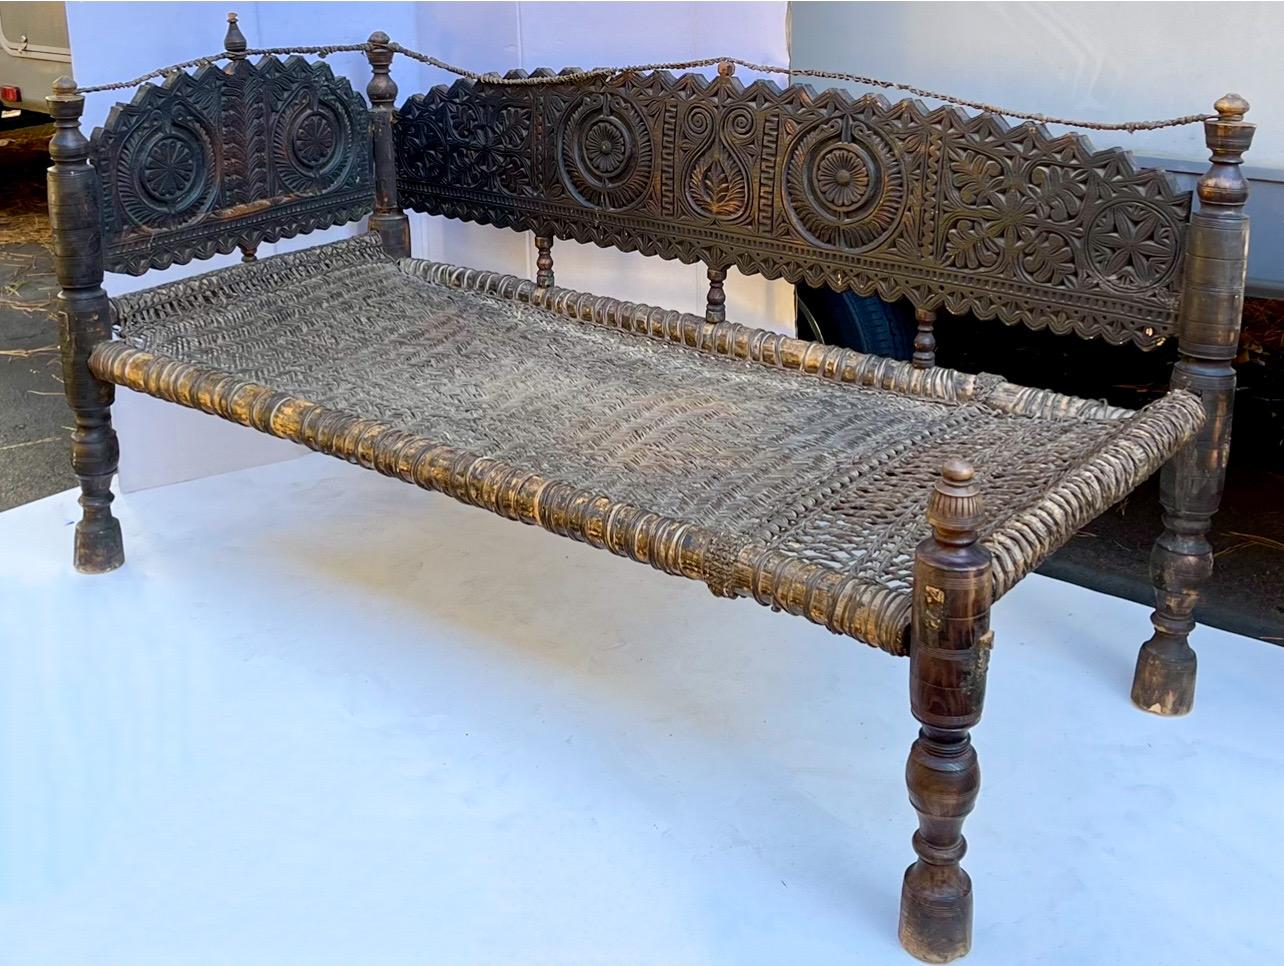 19th Century Early 19th-C. Rustic Moroccan Carved Wood and Wicker Daybed / Chaise / Sofa